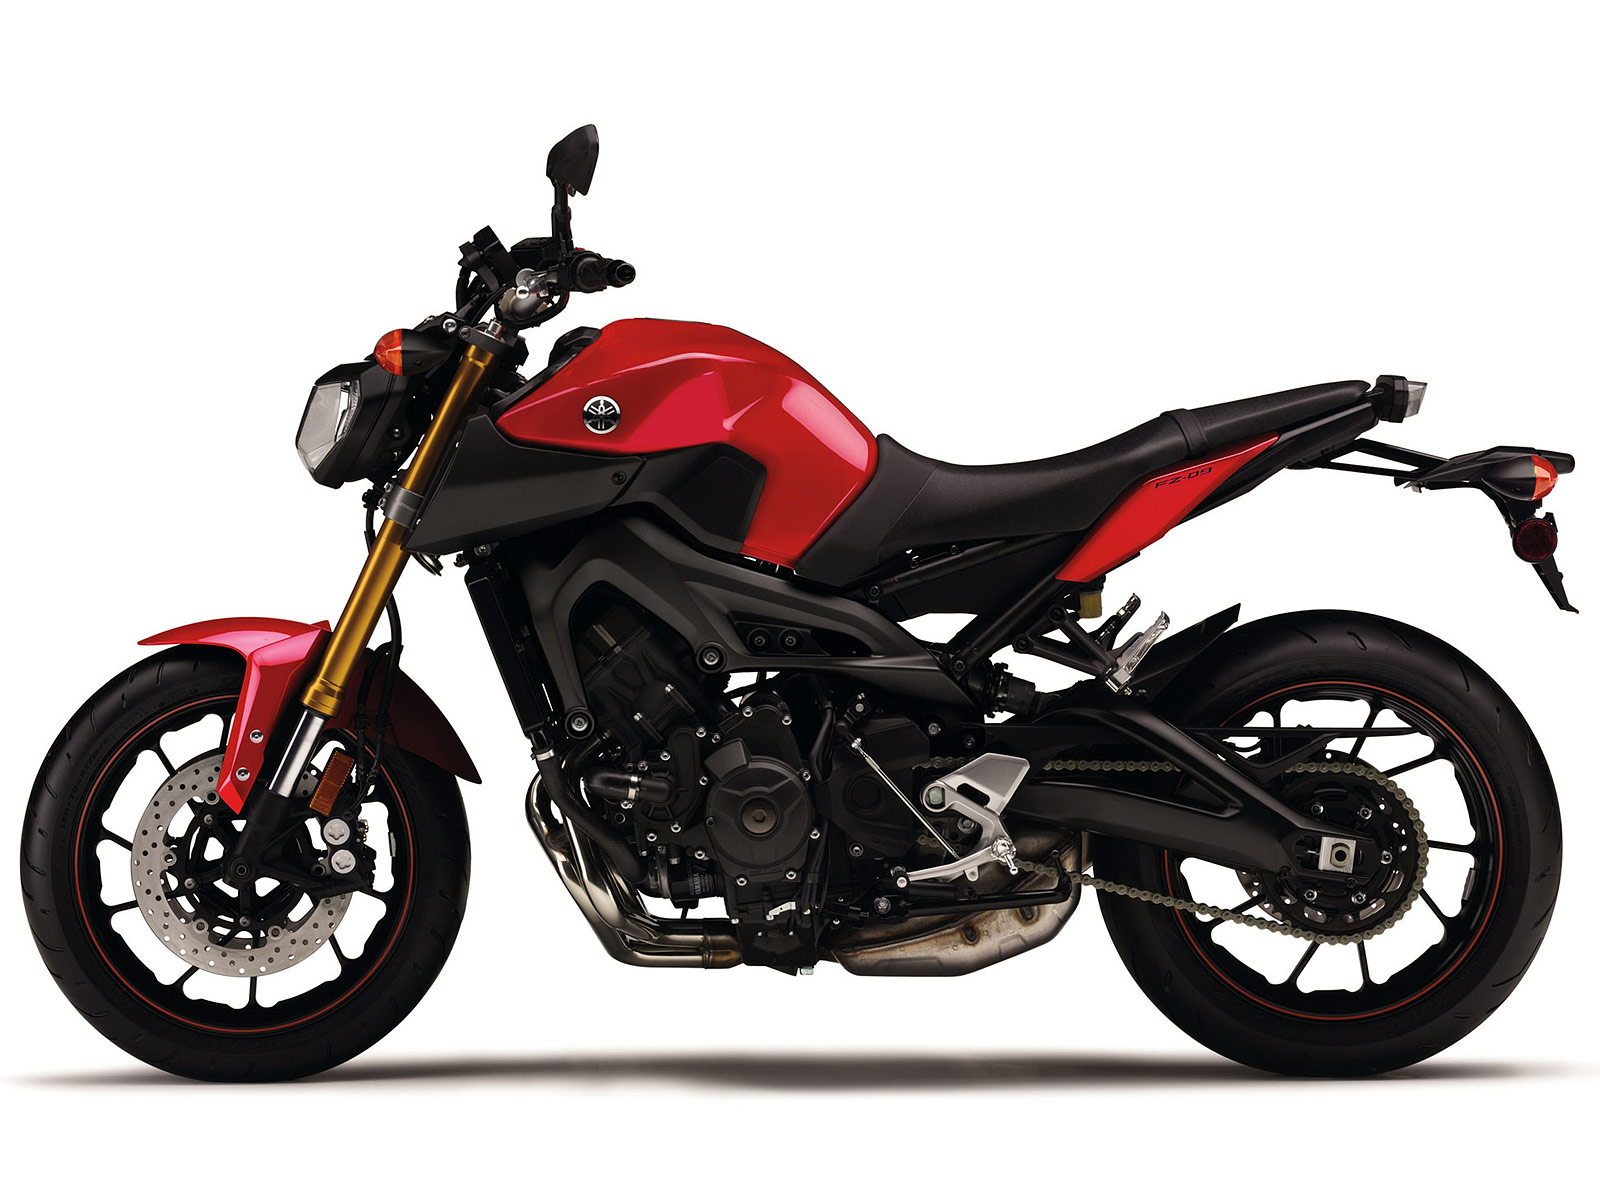 2014 FZ-09 Yamaha Insurance information, pictures, specs